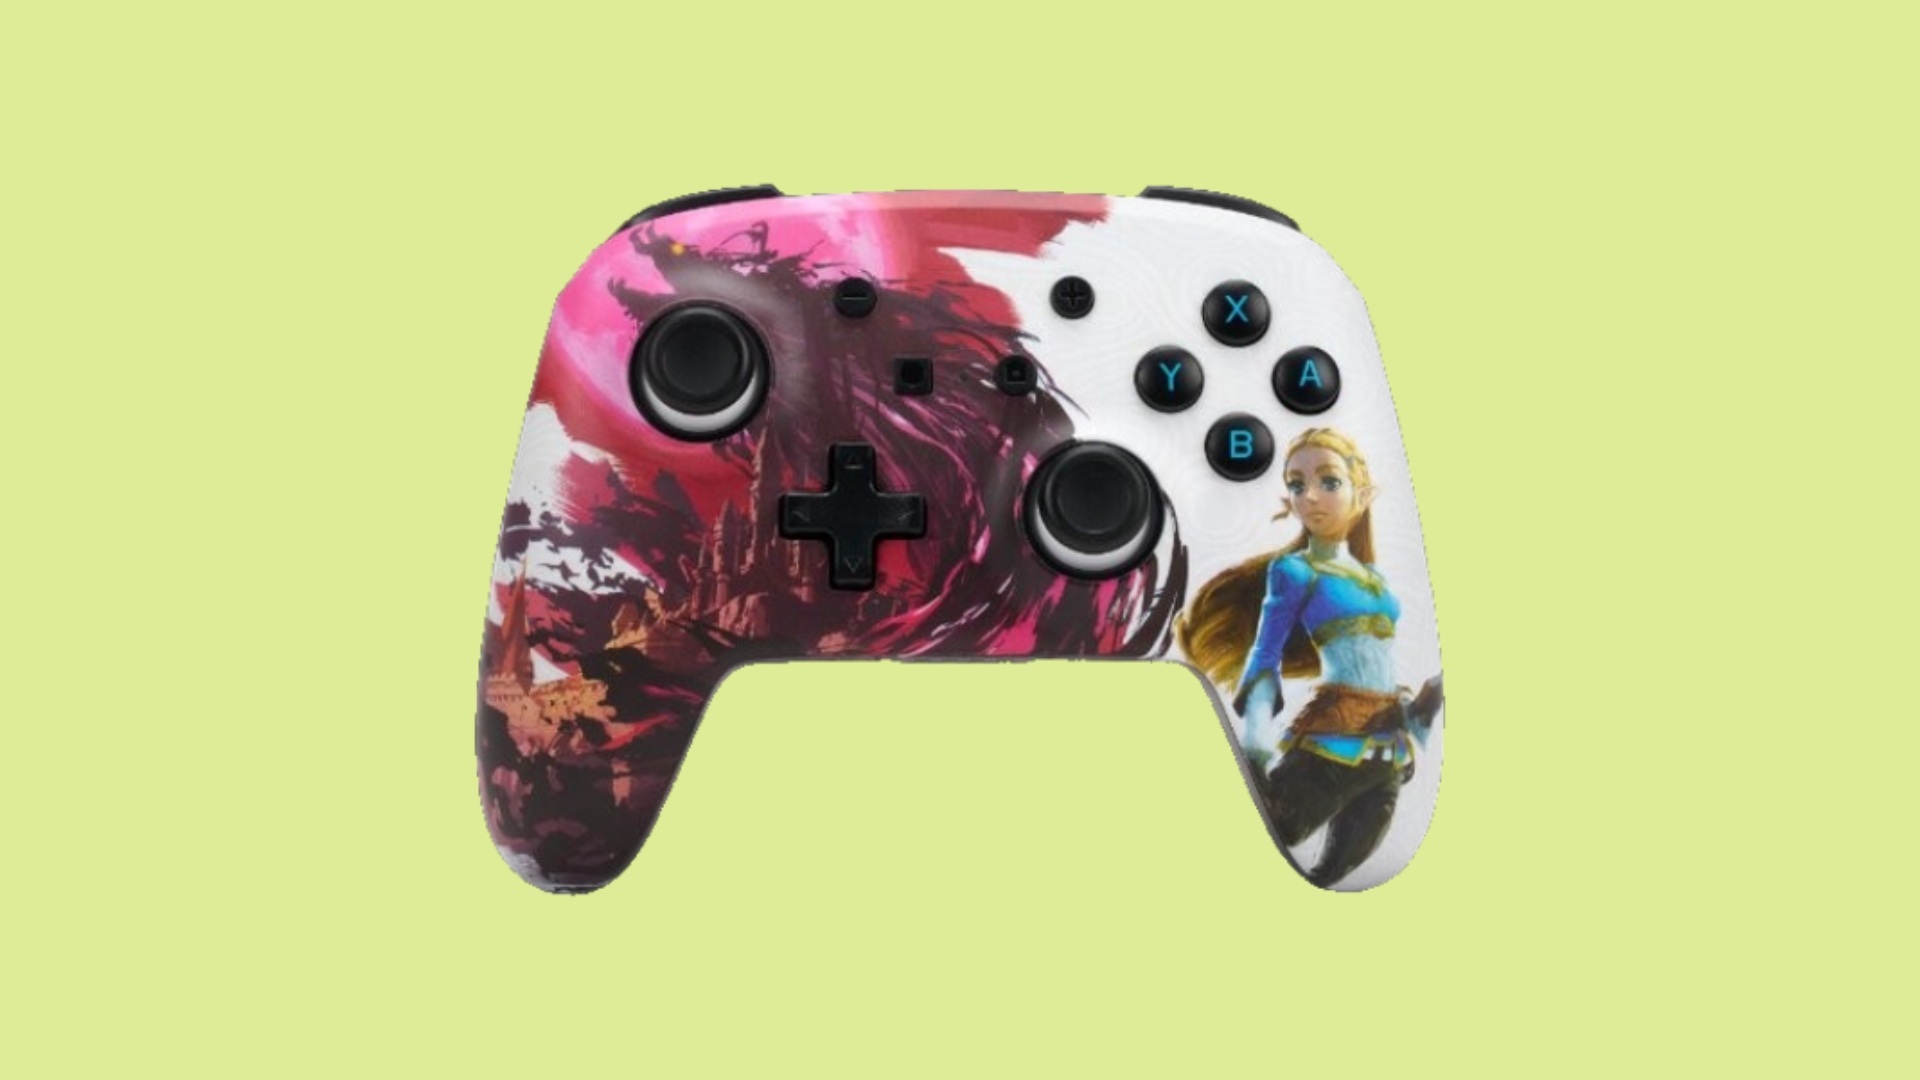 Best Nintendo Switch controllers - image shows a controller featuring Zelda artwork, alongside Ganon attacking Hyrule Castle.